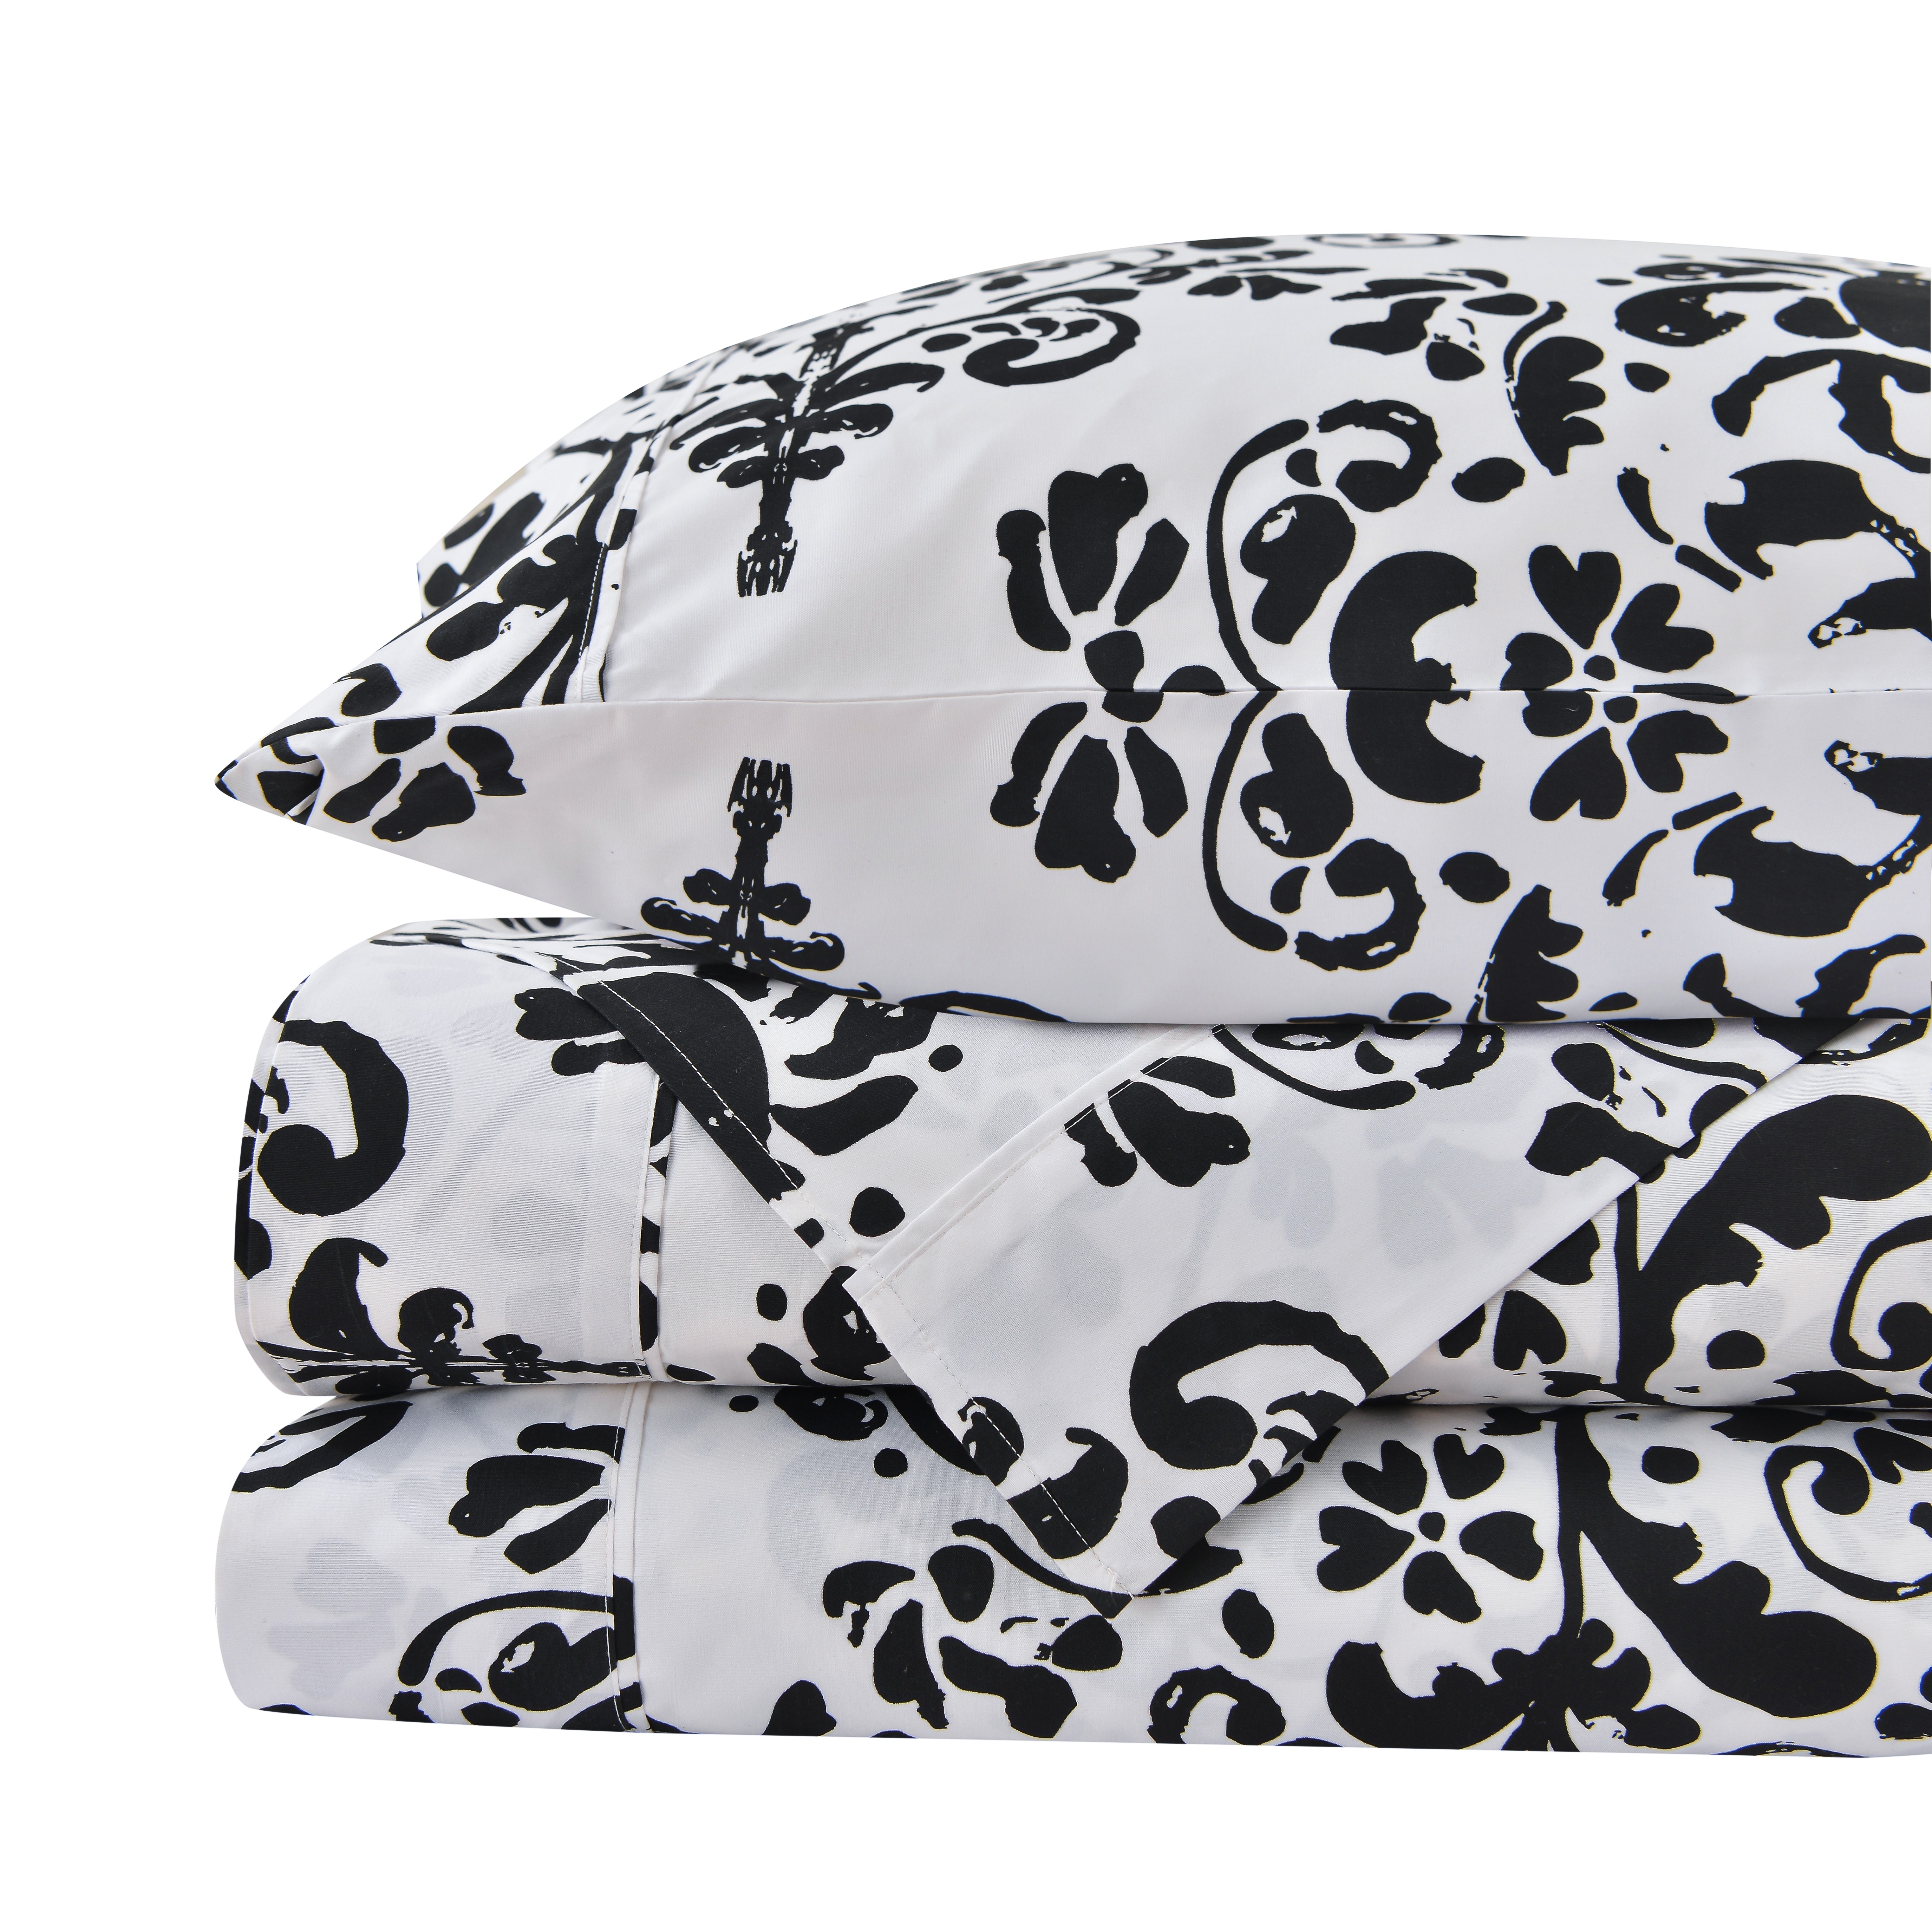 American Home Collection Ultra Soft 4-6 Piece Black & White Damask Bed Sheet Set - Queen